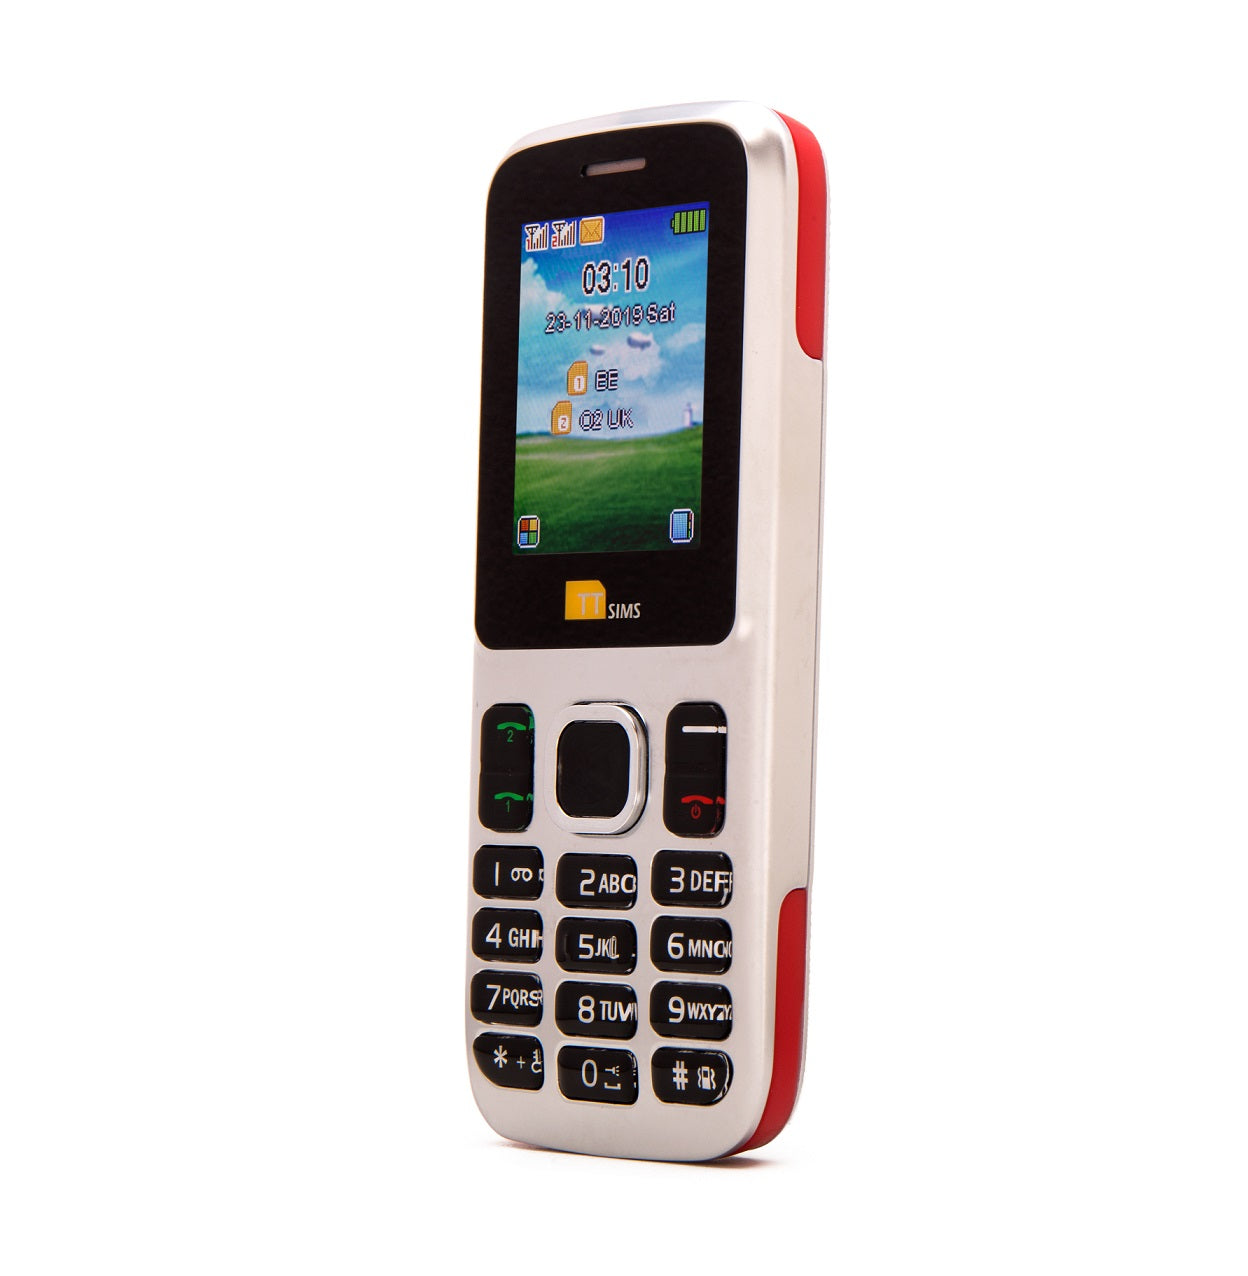 TTfone Red TT130 Dual Sim - Warehouse Deals with USB Cable and Vodafone Pay As You Go